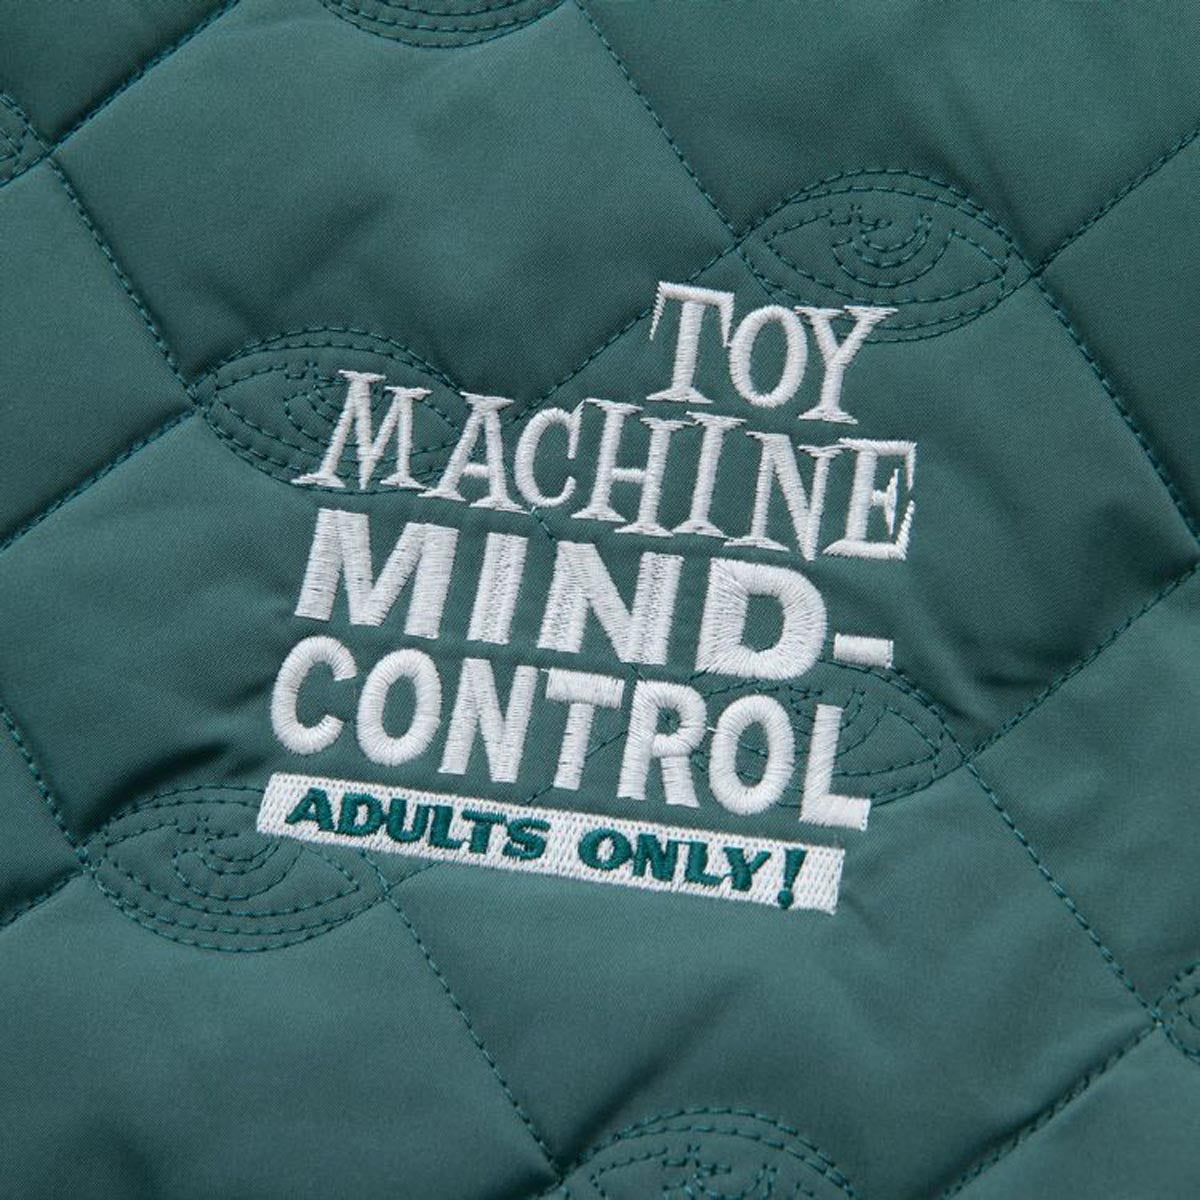 Toy Machine Sect Eye Stitch Quilted Bomber Jacket - Green image 3